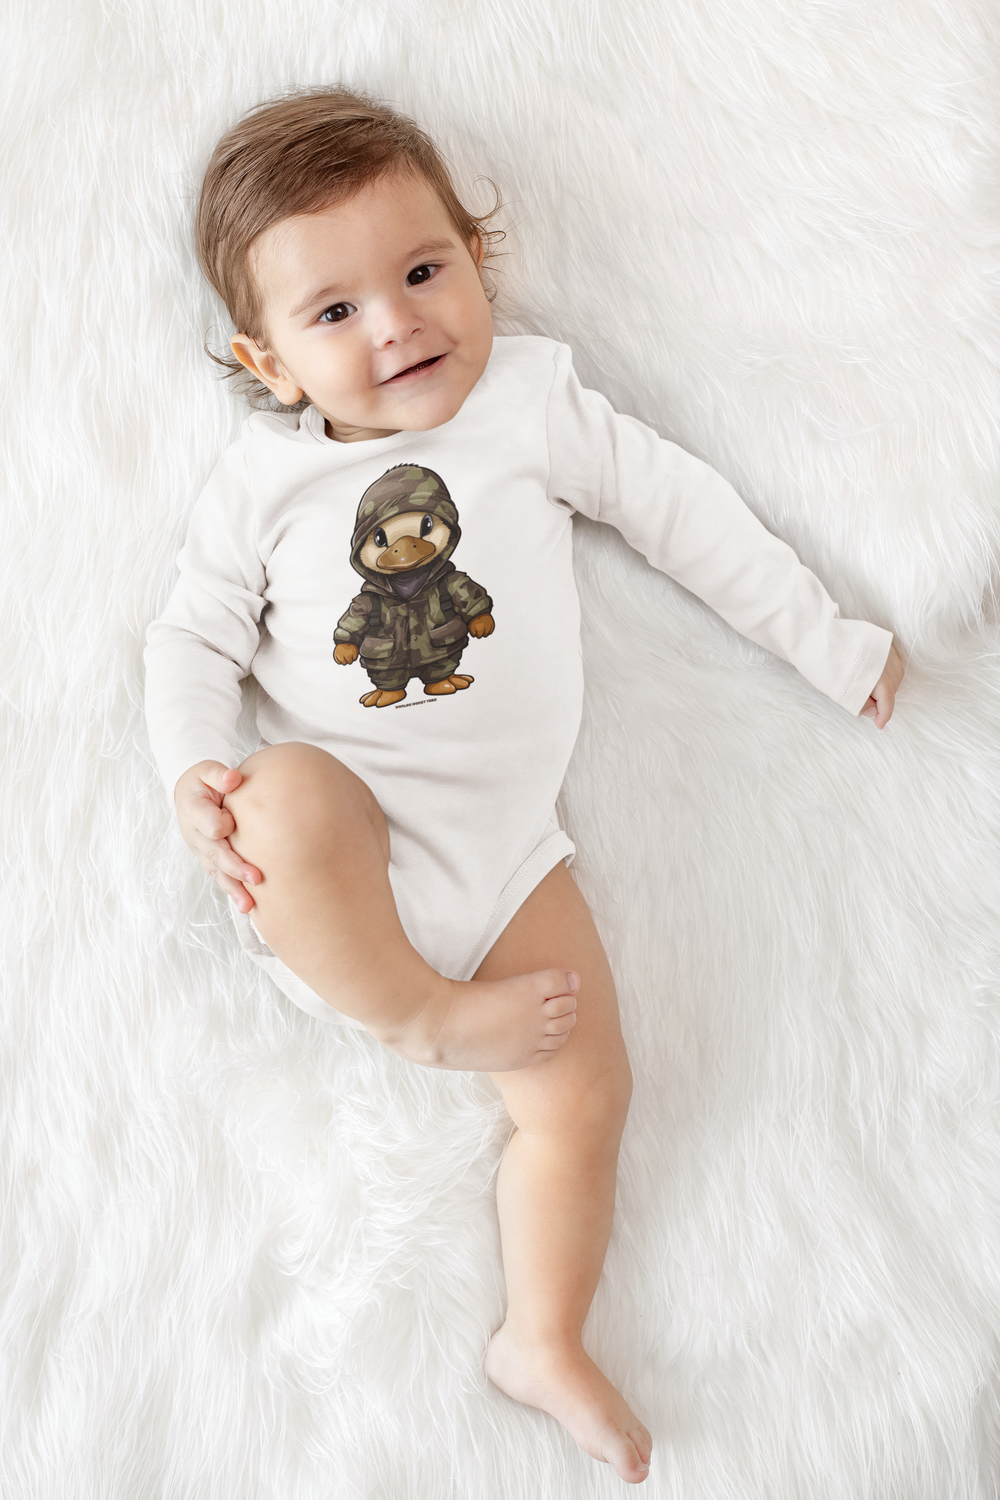 A durable infant long sleeve bodysuit, featuring plastic snaps for easy changing. Crafted from 100% combed ring-spun cotton for a soft feel. Available in various sizes. From Worlds Worst Tees: Hunting Baby Long Sleeved Onesie.